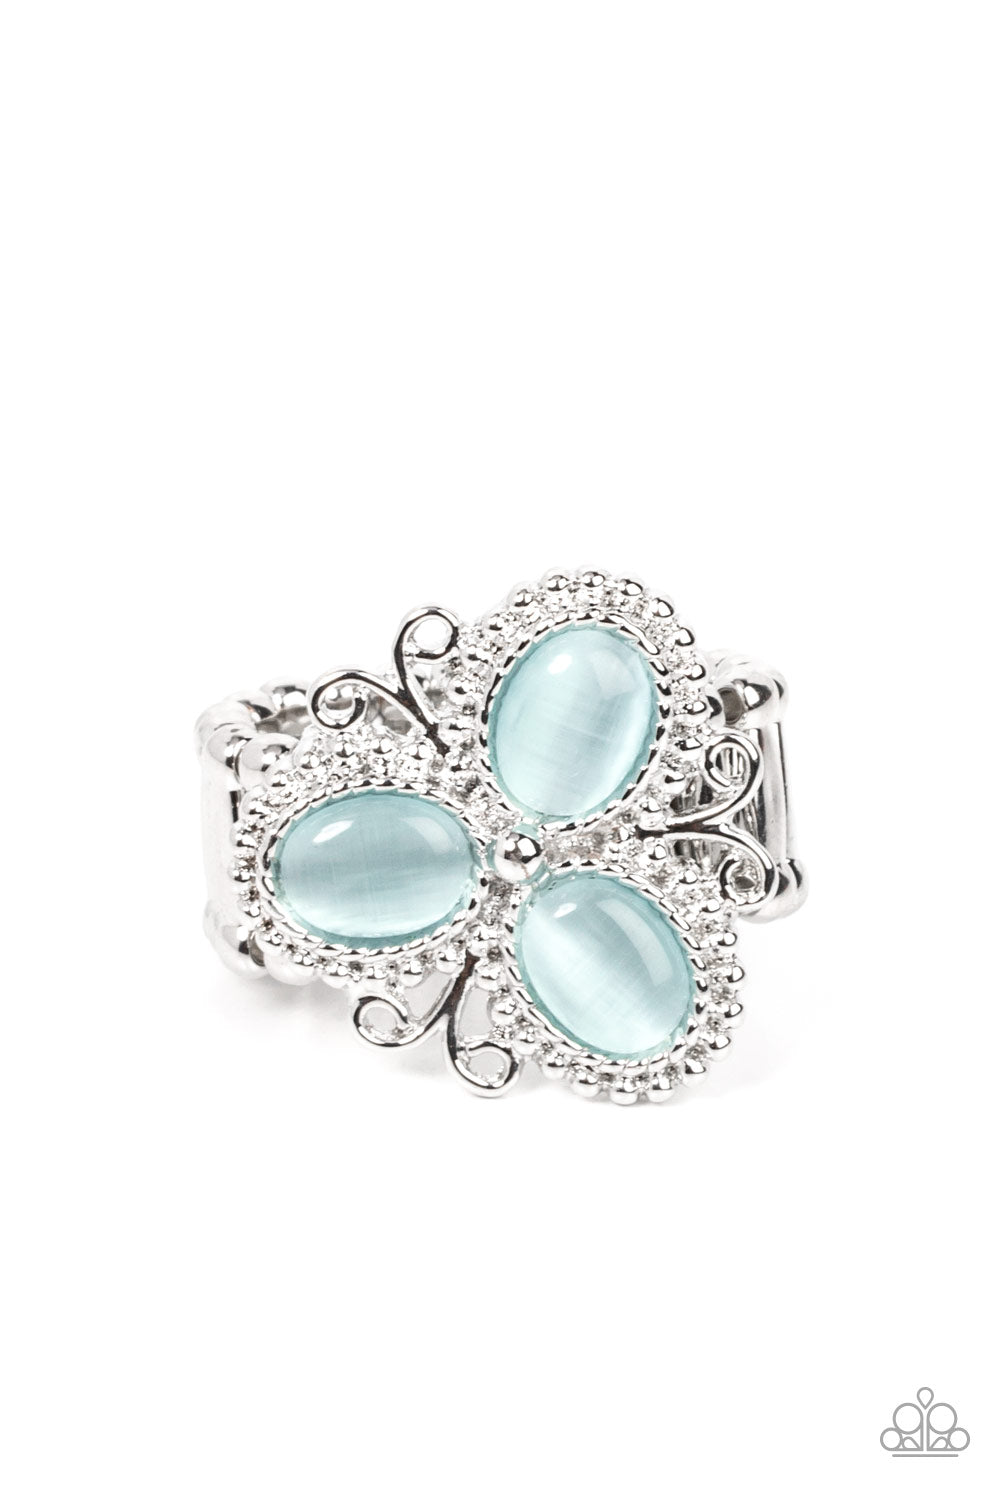 Bewitched Blossoms - Blue Ring - Princess Glam Shop